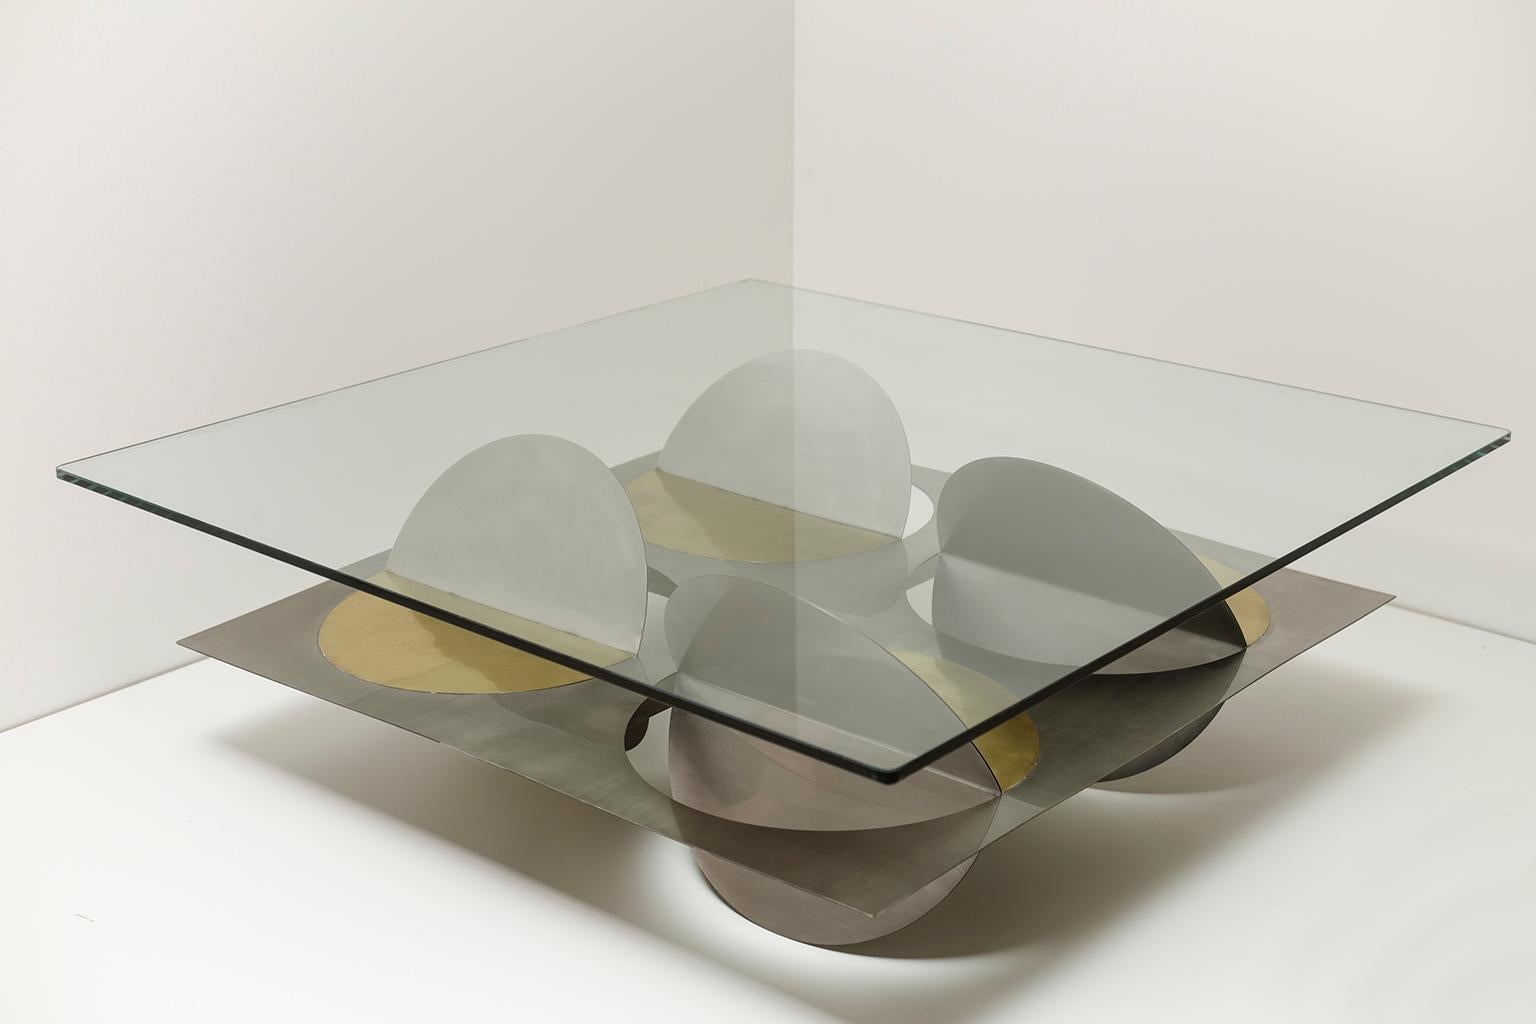 Stainless steel Moonsky coffee table by Ana Volante Studio
The Moon Collection
Dimensions: L 120 x W 120 x H 45 cm
Materials: Stainless steel, brass, glass on top

Ana Volante, founder of Ana Volante Studio, is a Venezuelan designer specialized